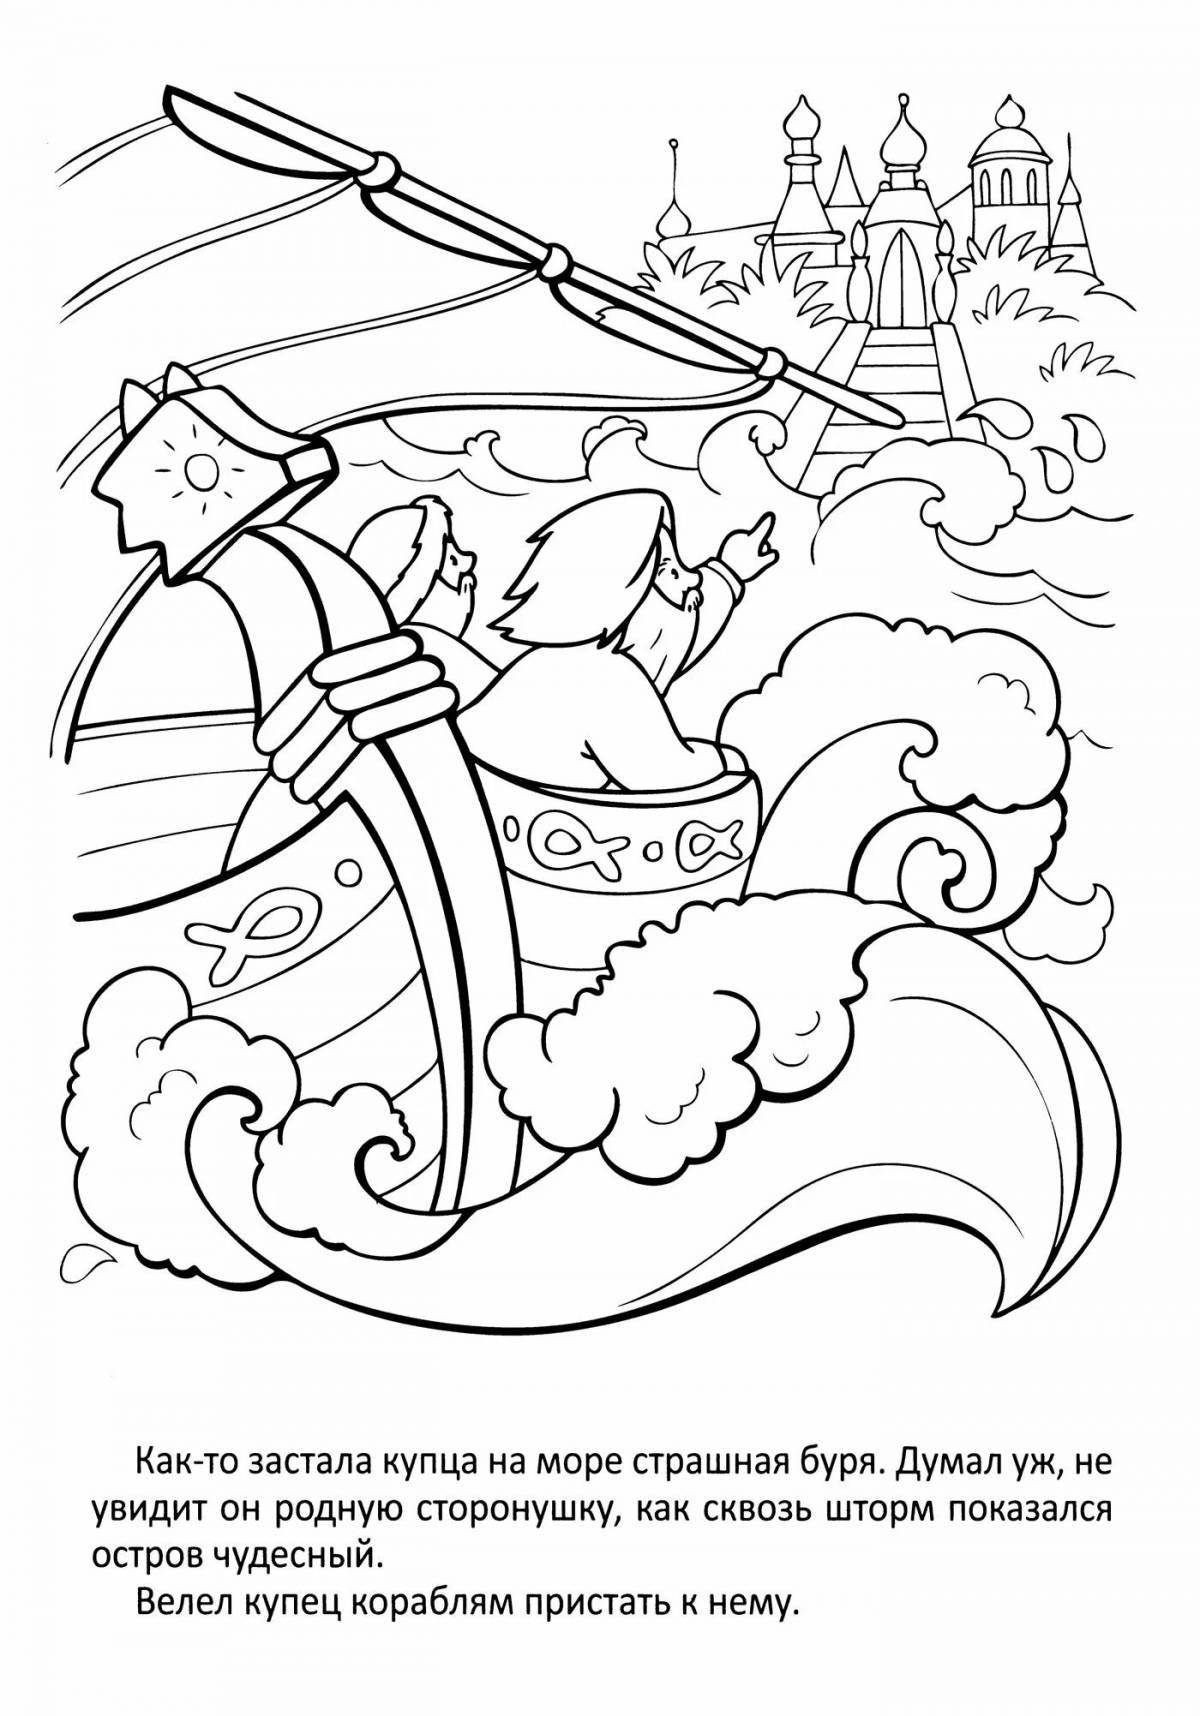 Bright coloring illustration for the tale of Tsar Saltan Grade 3